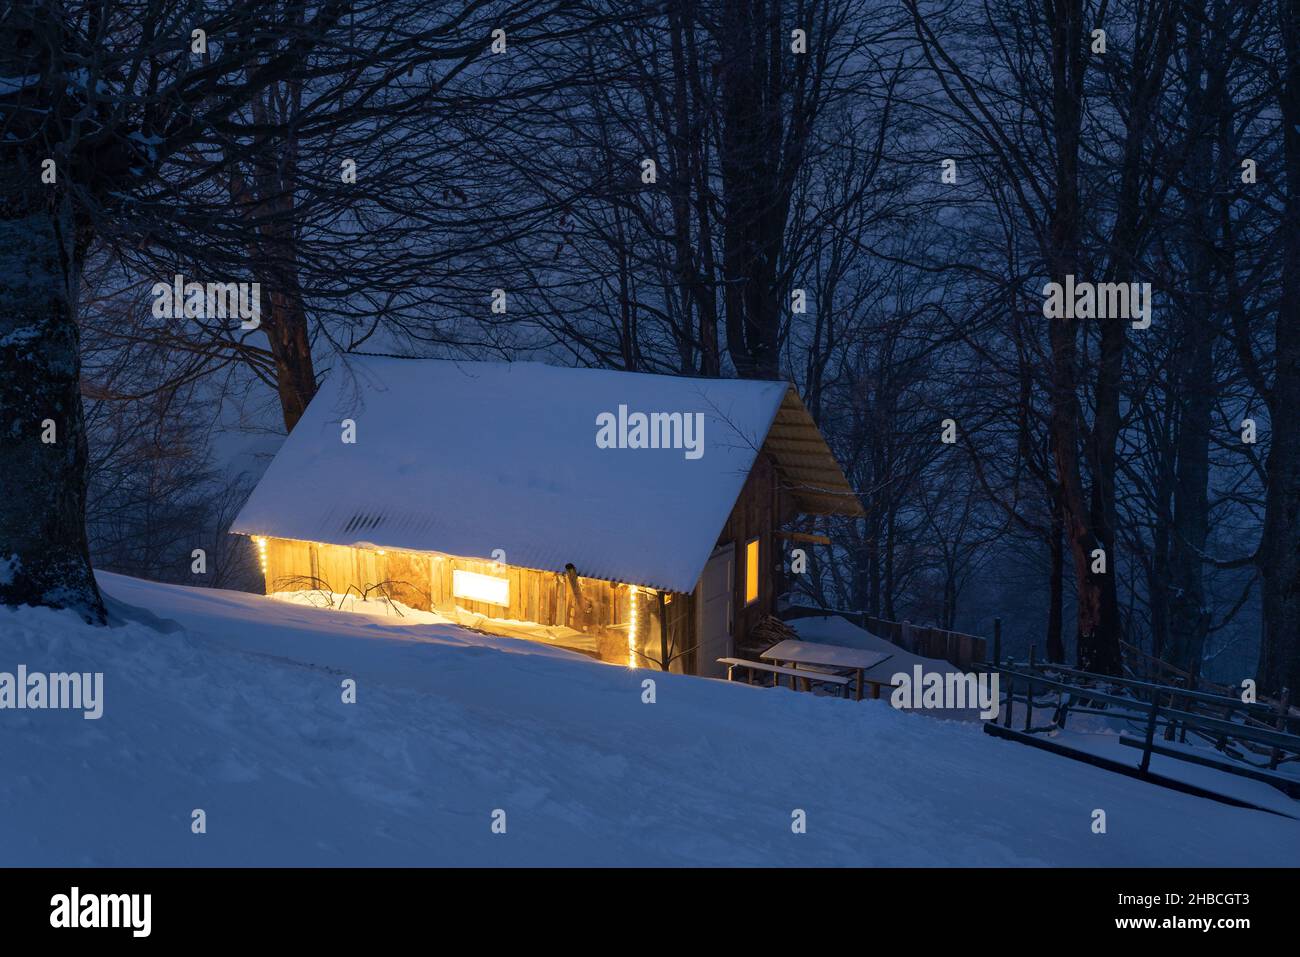 Night landscape with a cabin in a winter snowy forest Stock Photo